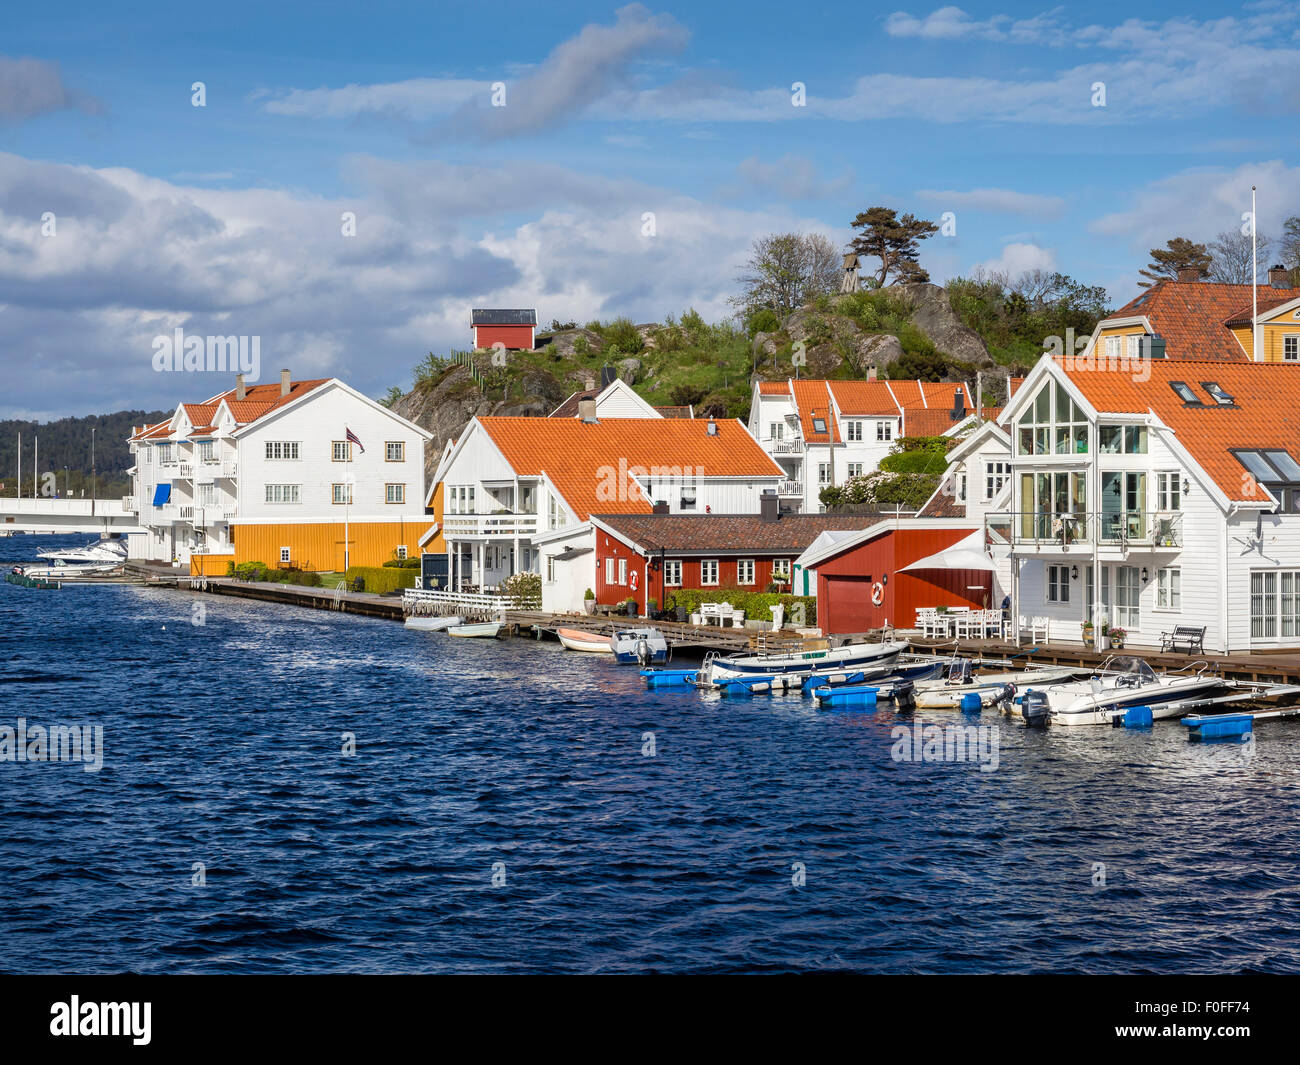 White houses in Mandal, at tbe famous Mandal river famous for salmon fishing, norwegian coast, Mandal, Vest-Agder, Norway Stock Photo